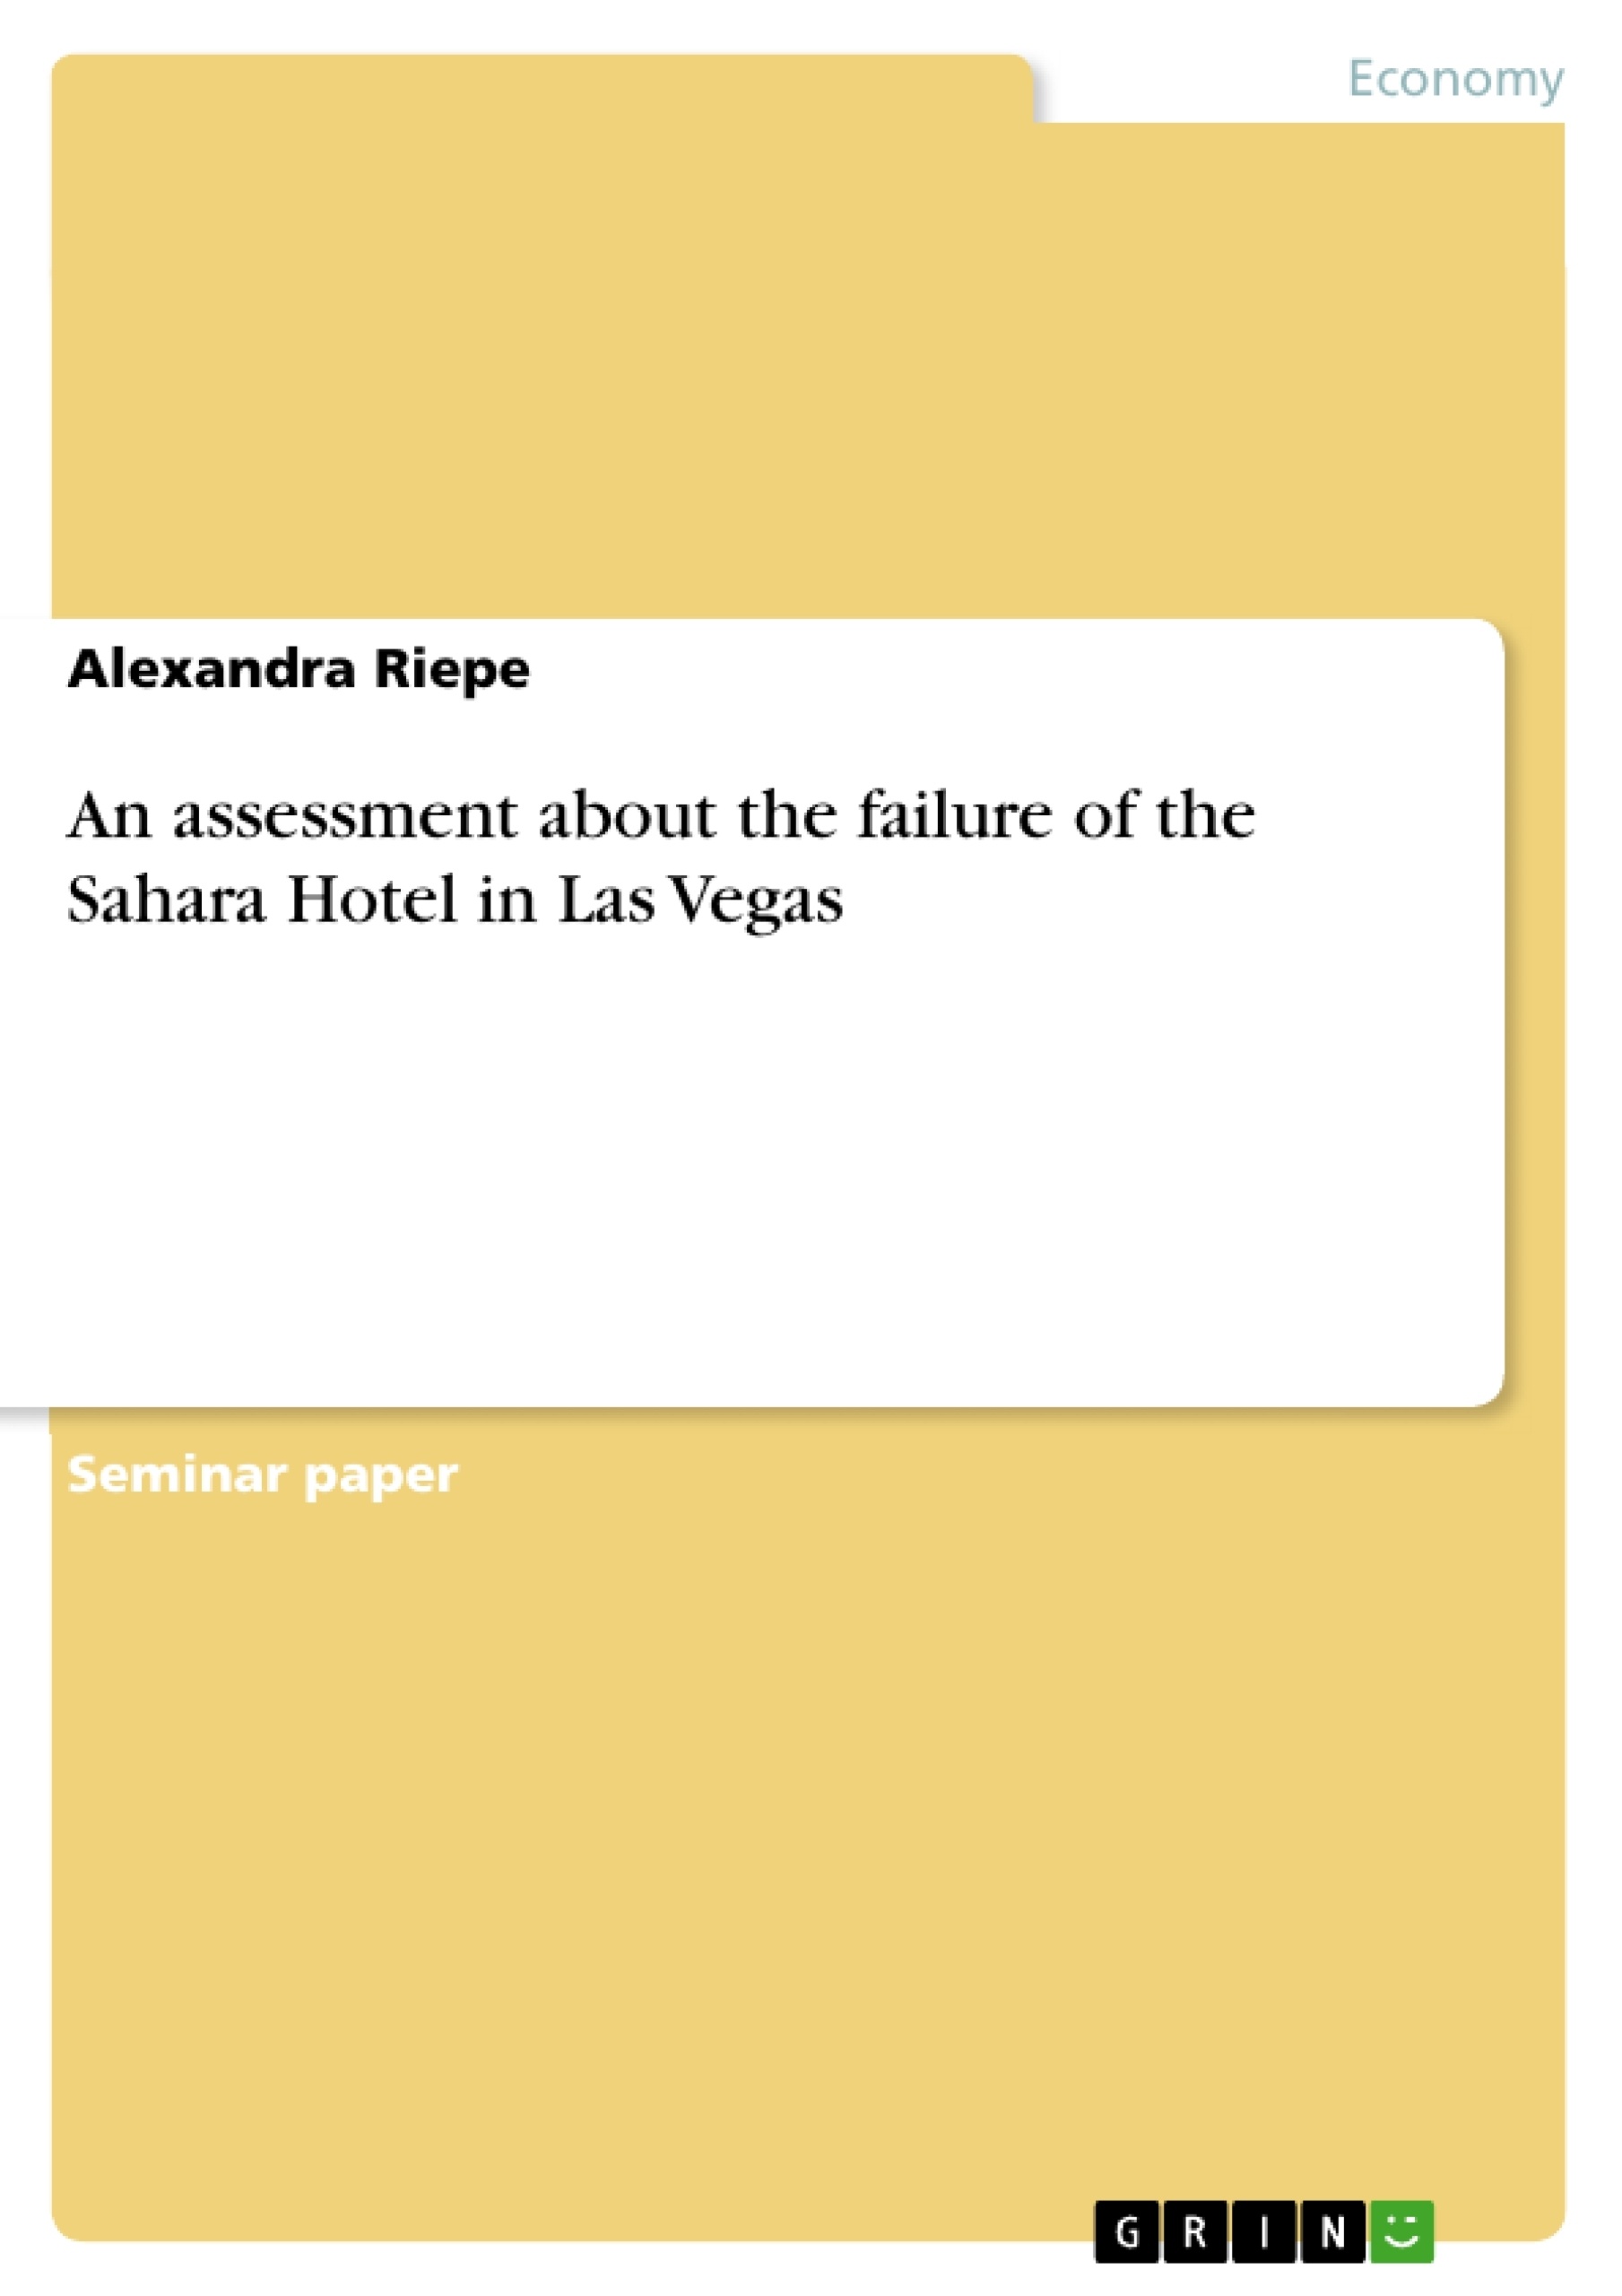 Title: An assessment about the failure of the Sahara Hotel in Las Vegas